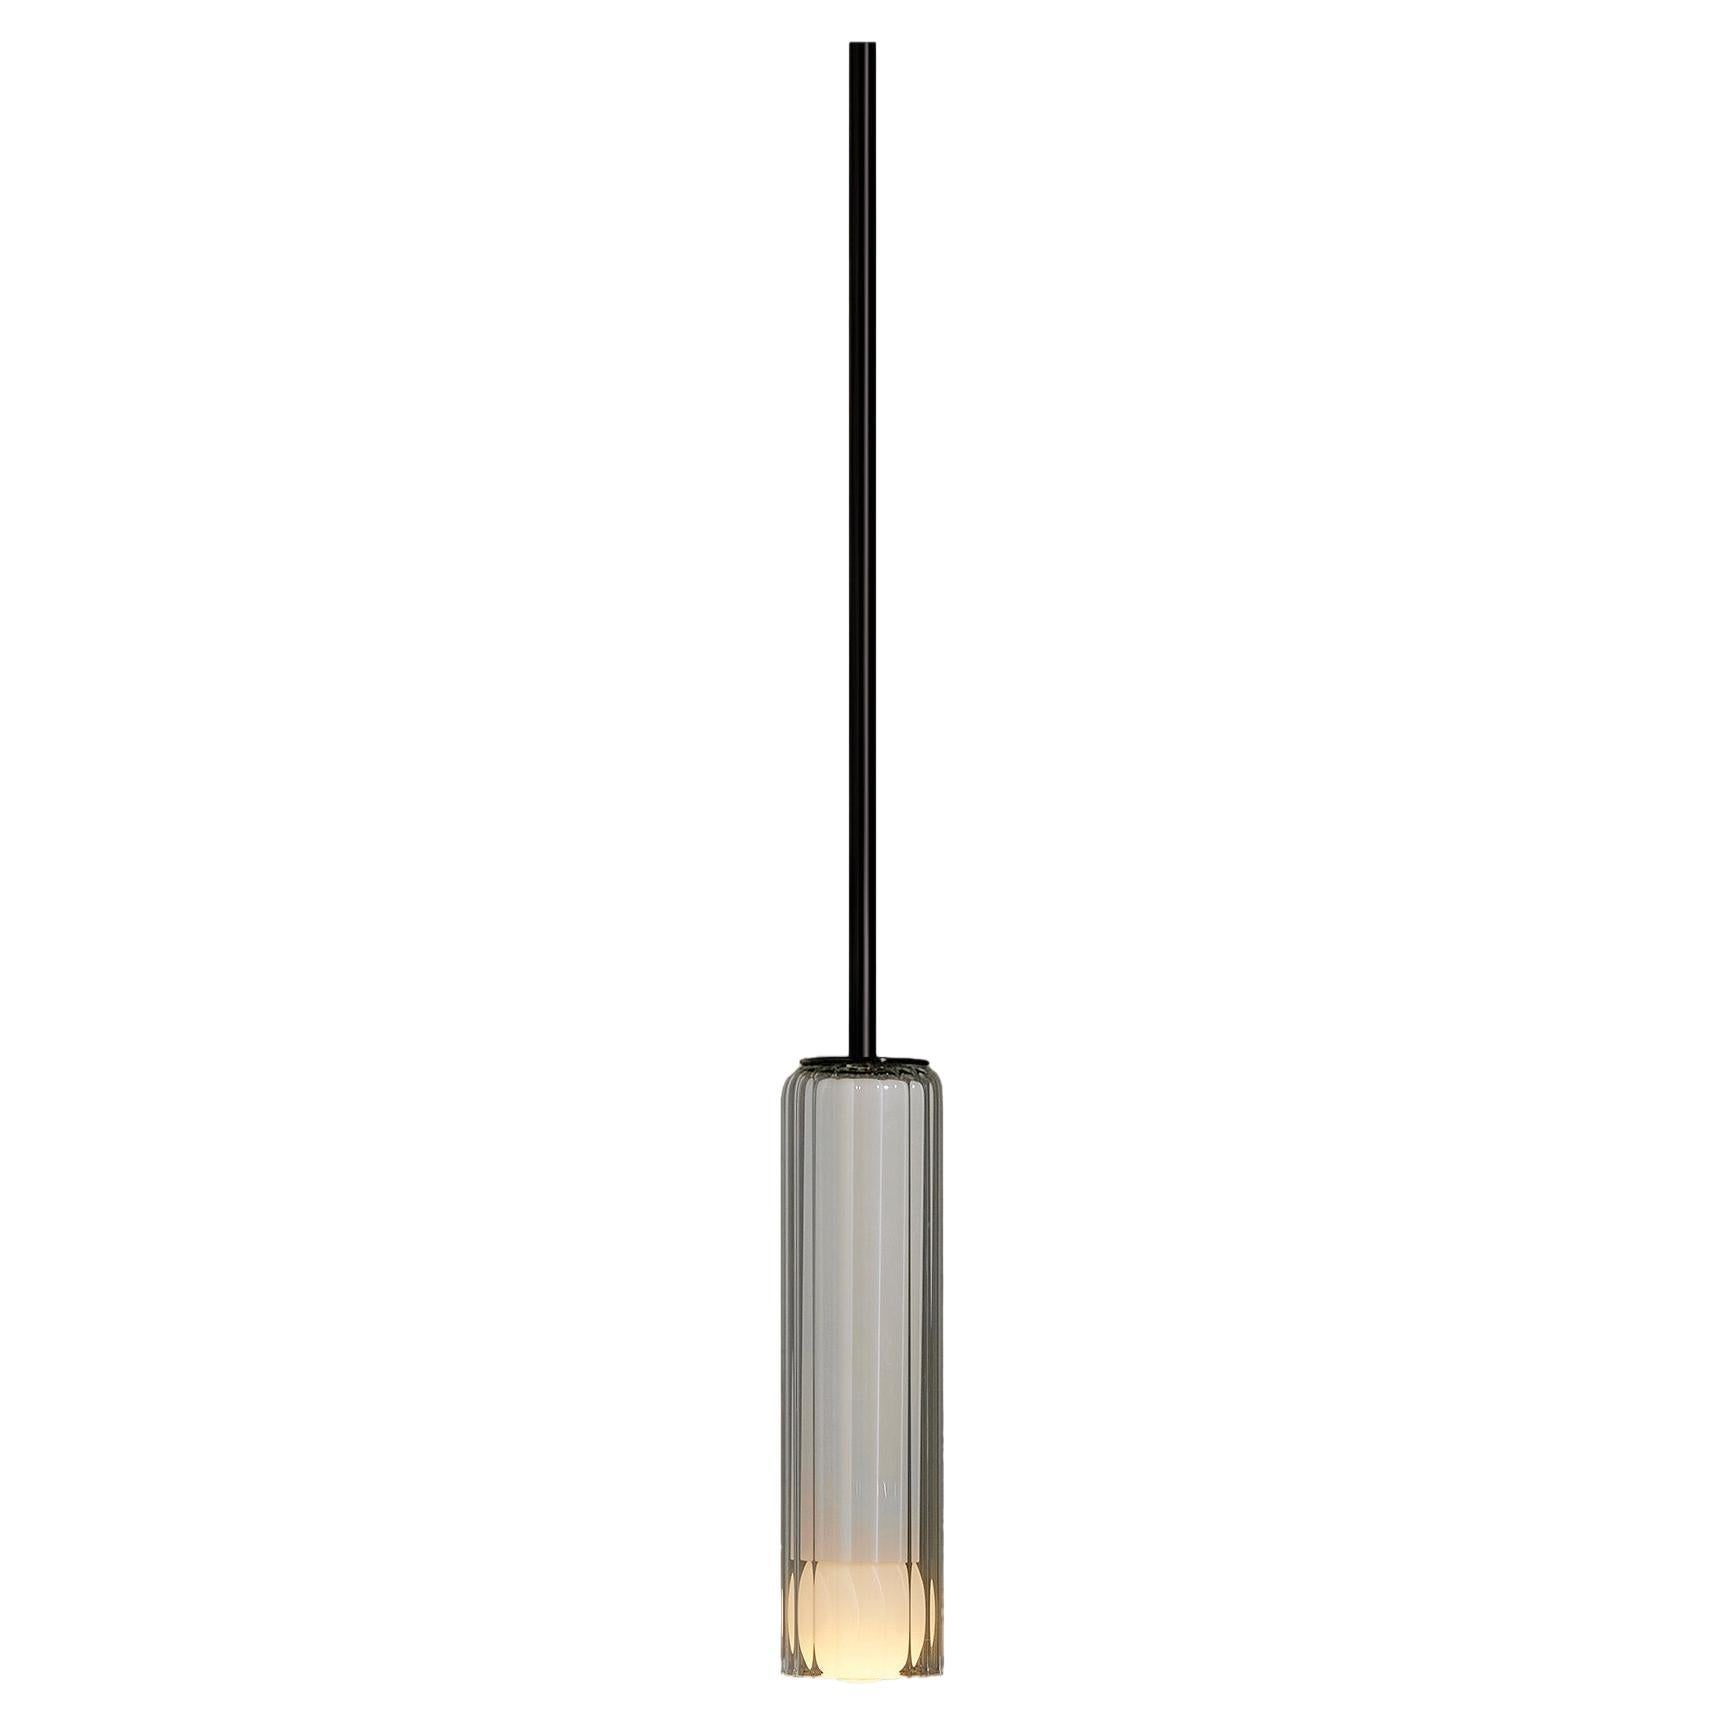 Marz Designs, "Lini Pendant Light, Short with Solid Rod", Fluted Glass Pendant For Sale